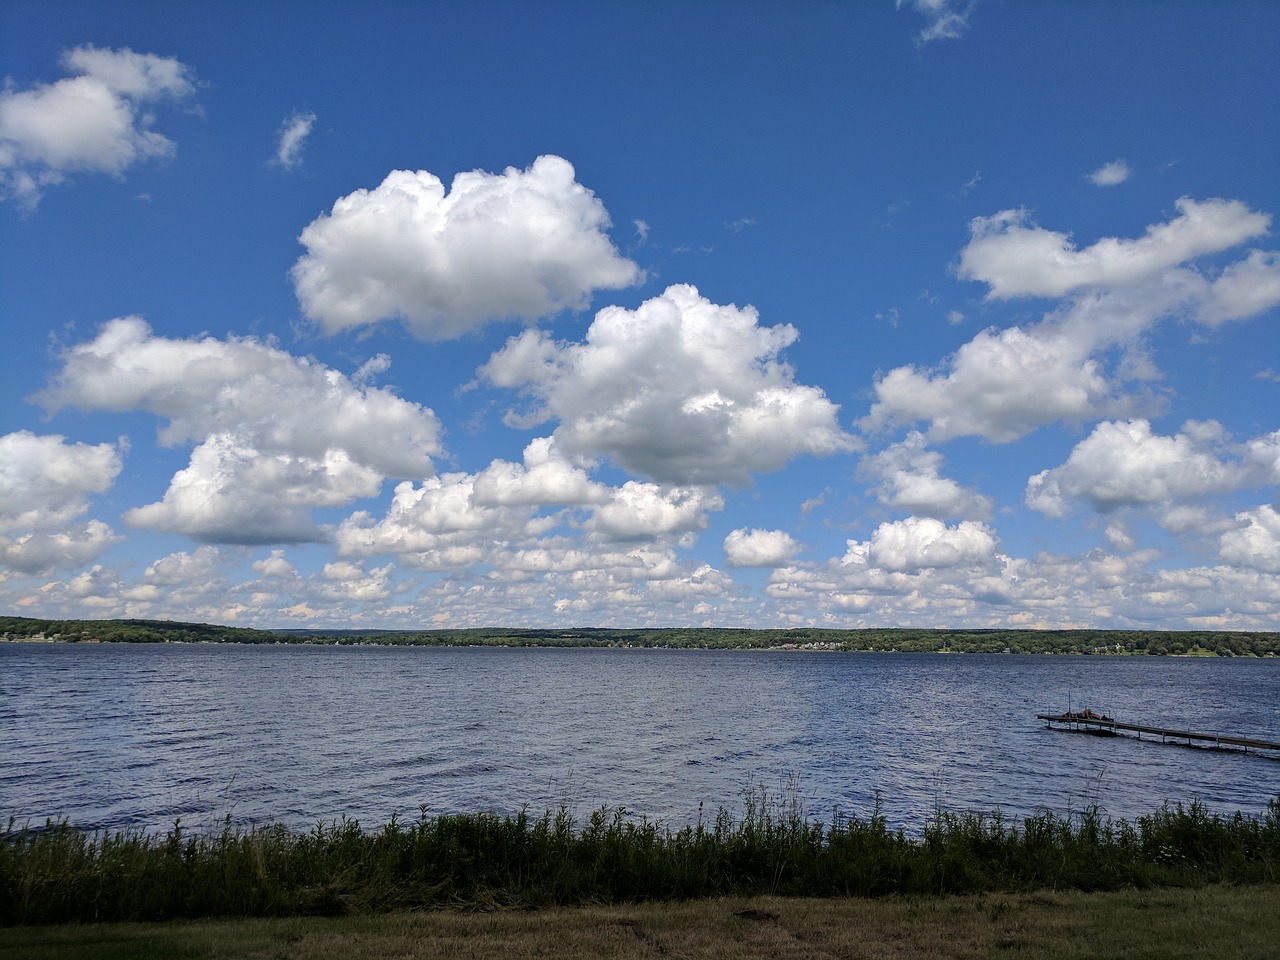 Lake Chautauqua Fluffy Clouds Blue Sky Over Water Free Pictures Free Photos Free Image From Needpix Com